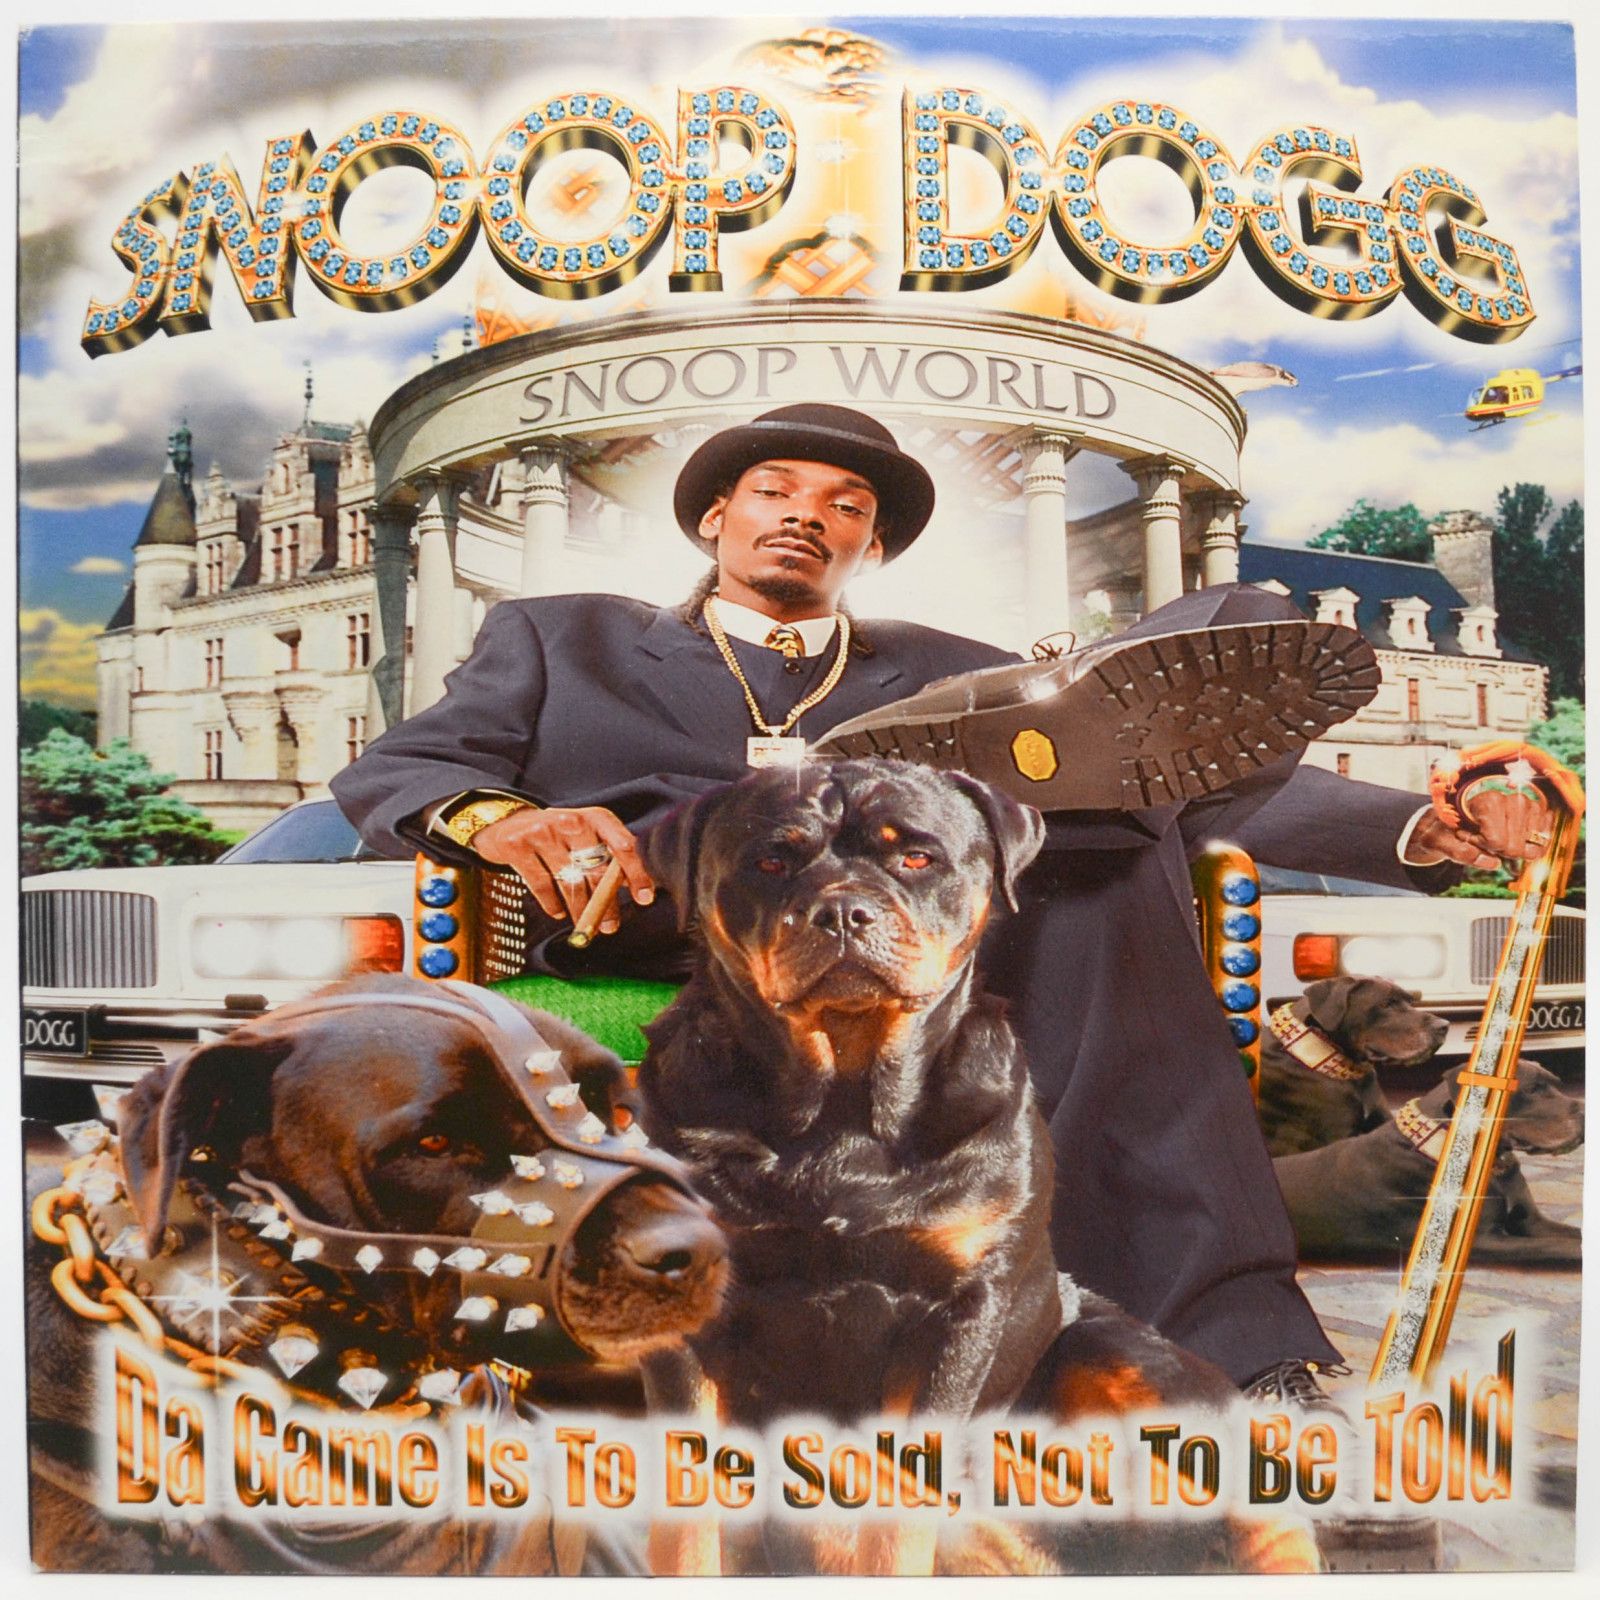 Snoop Dogg — Da Game Is To Be Sold, Not To Be Told (2LP), 1998